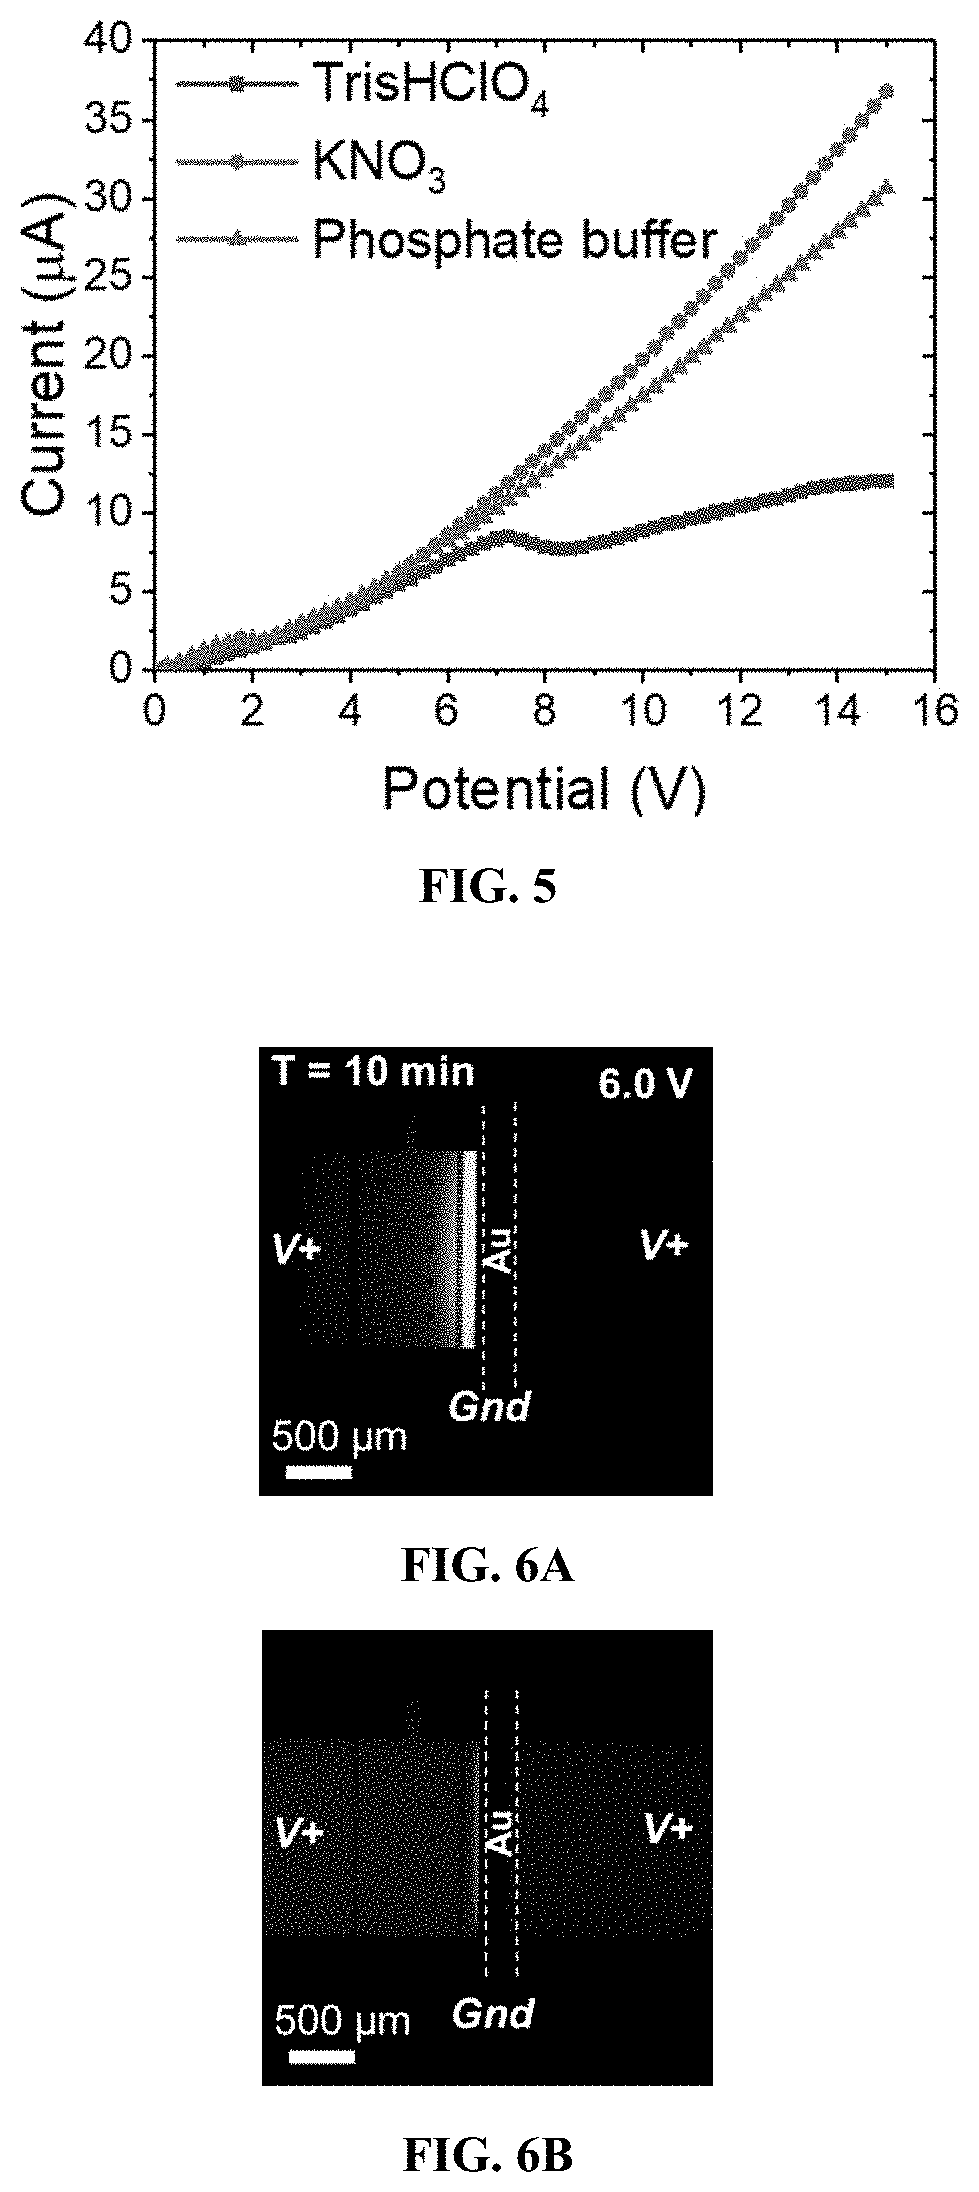 Device for electrokinetic focusing and electrical detection of particles and chemical species facilitated by a porous electrode